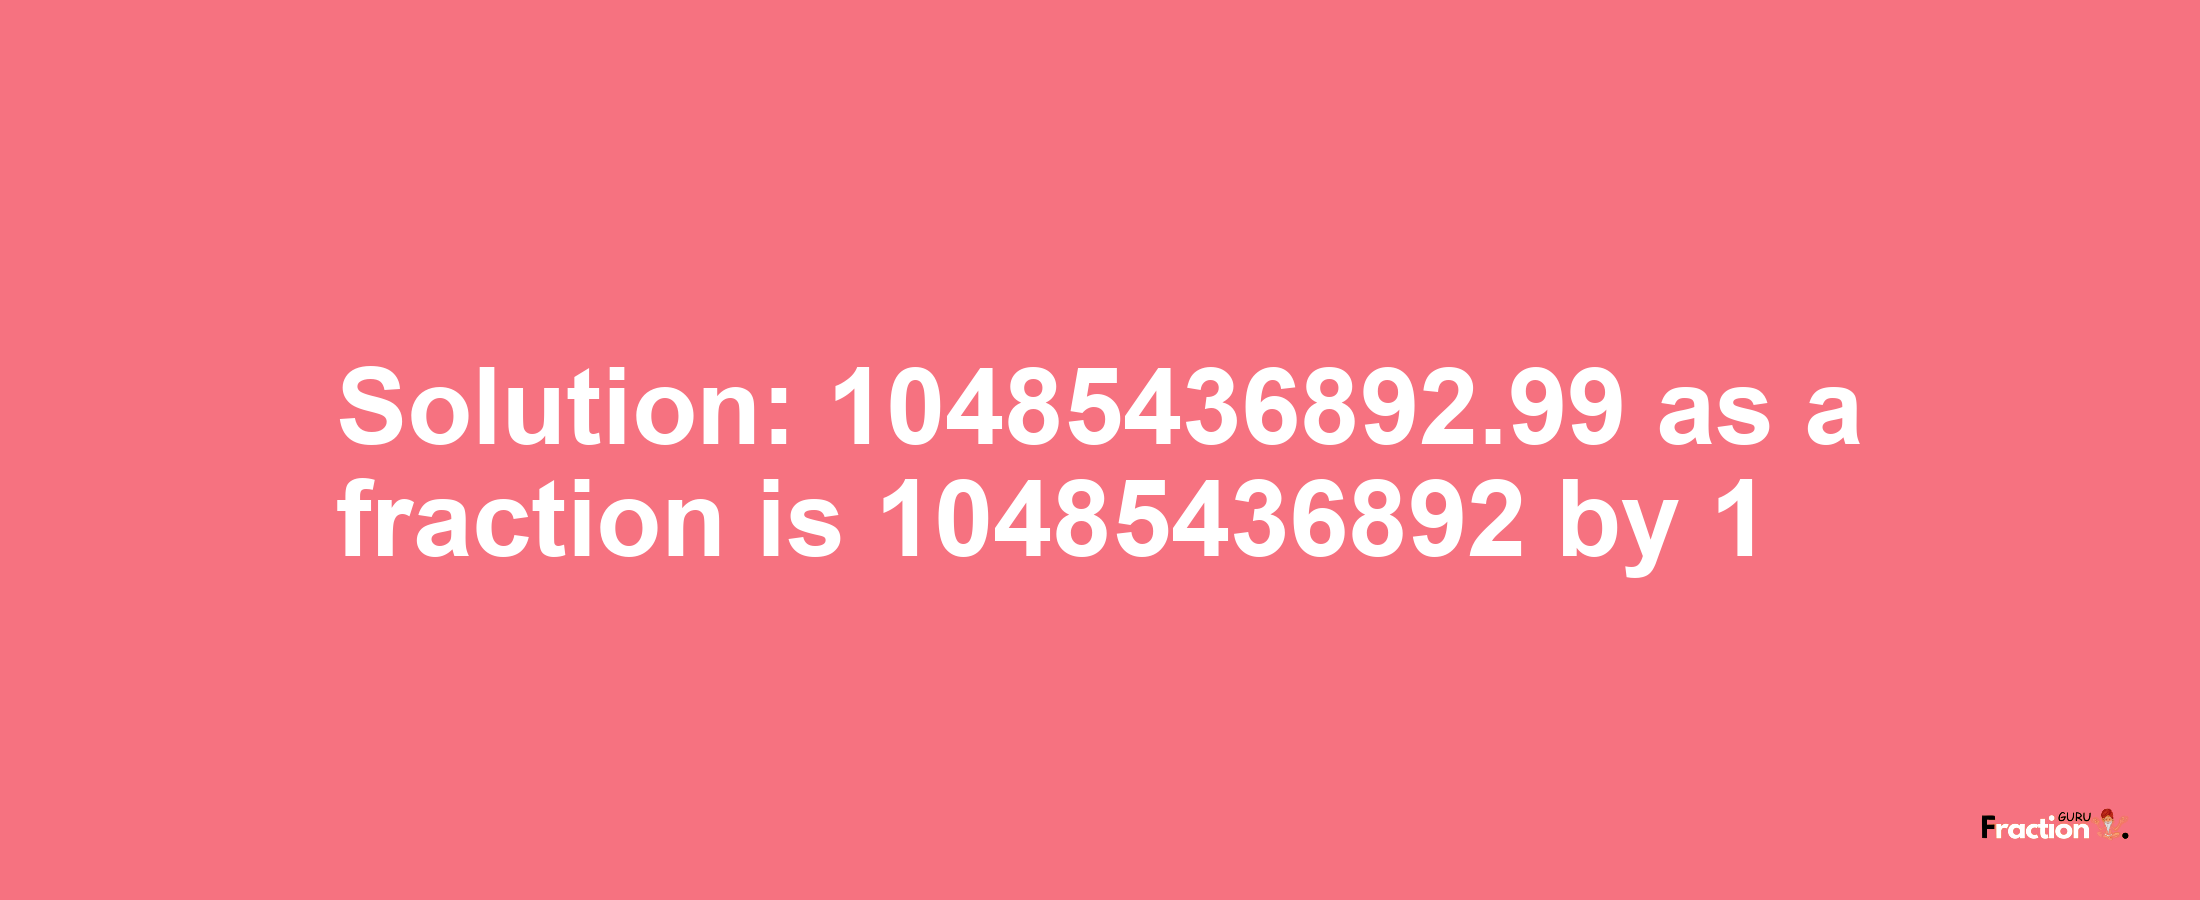 Solution:10485436892.99 as a fraction is 10485436892/1